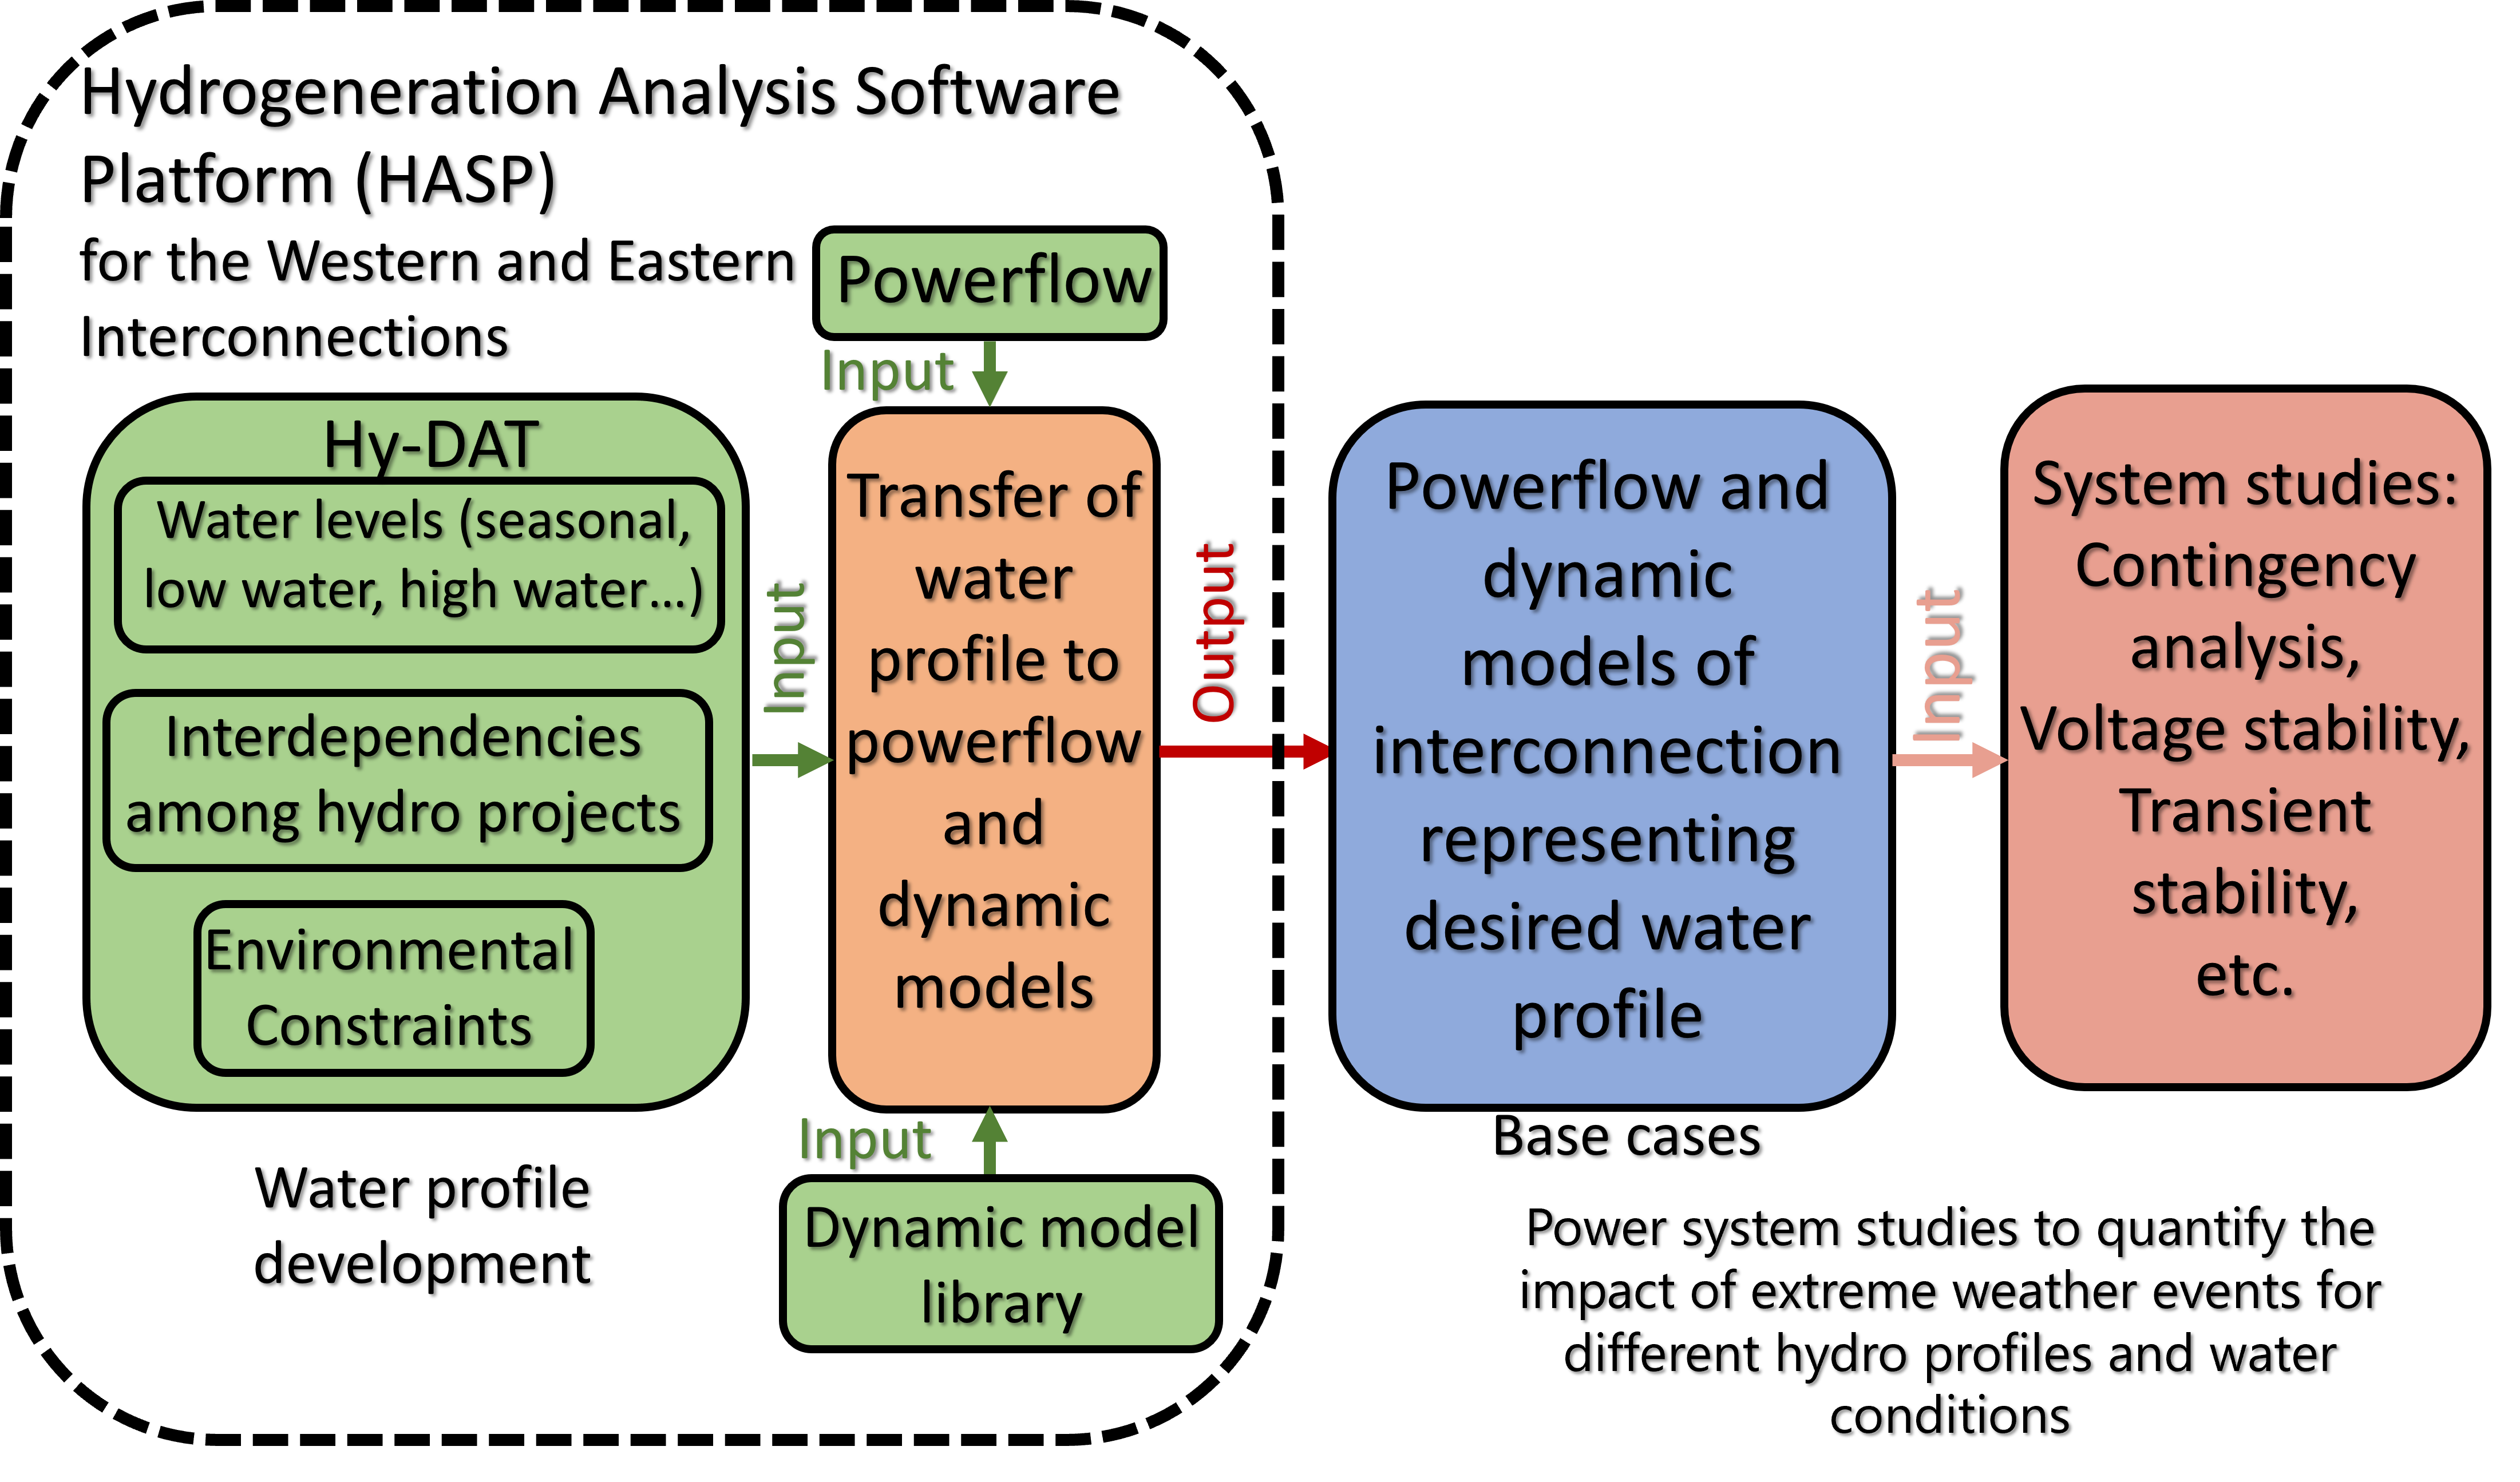 A flowchart showing how the new HASP tool fits into traditional power systems and modeling studies.